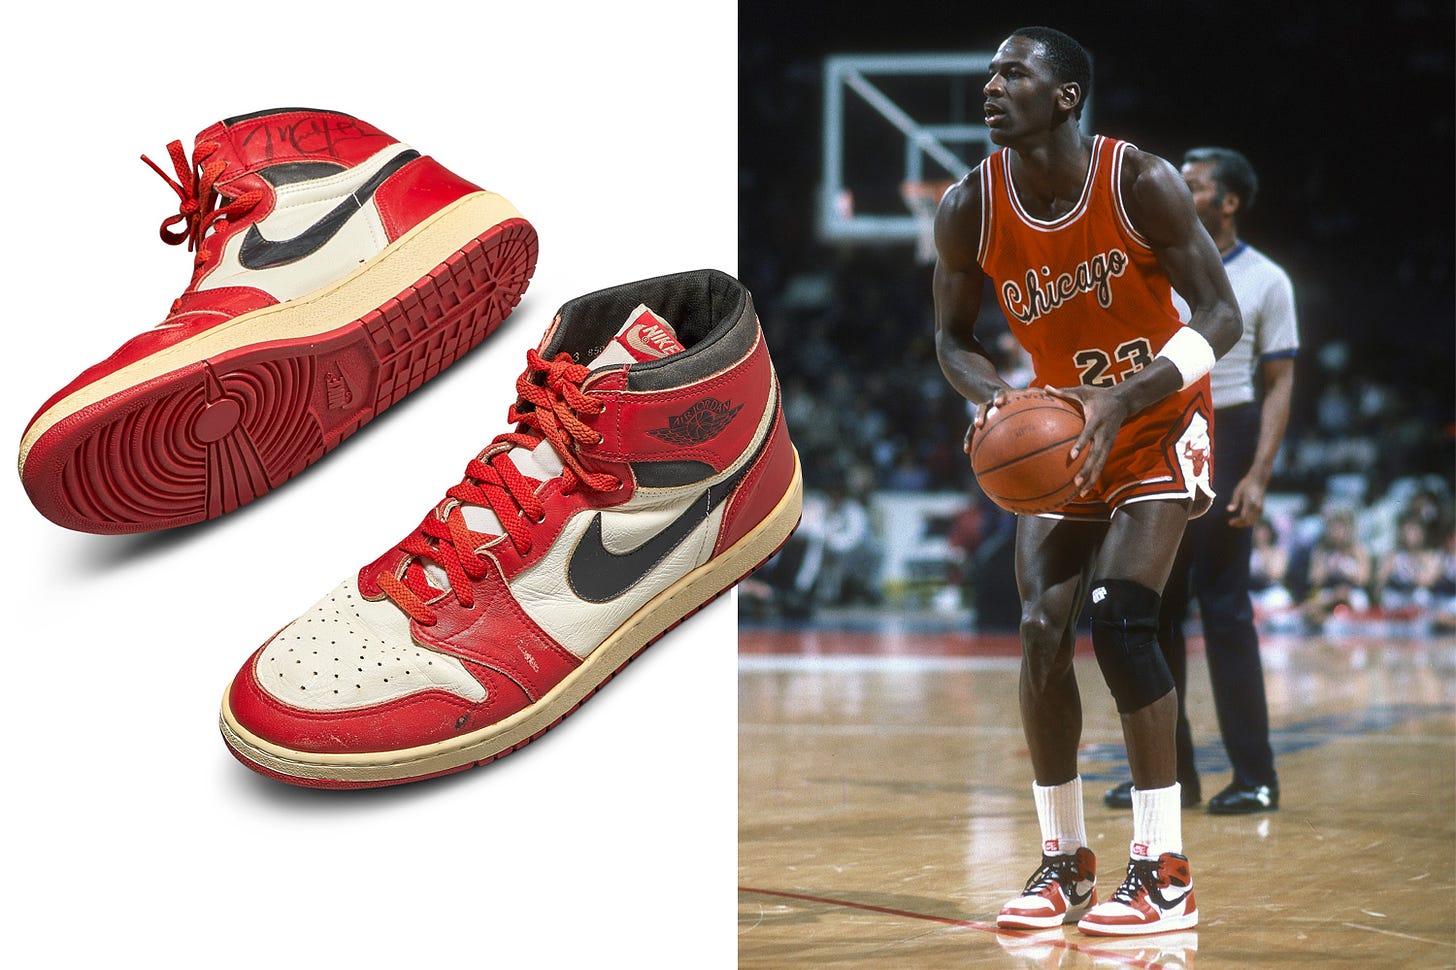 Michael Jordan's game-worn Air Jordan's from 1985 sell for world-record  £460,000 in Sotheby's auction | The Sun